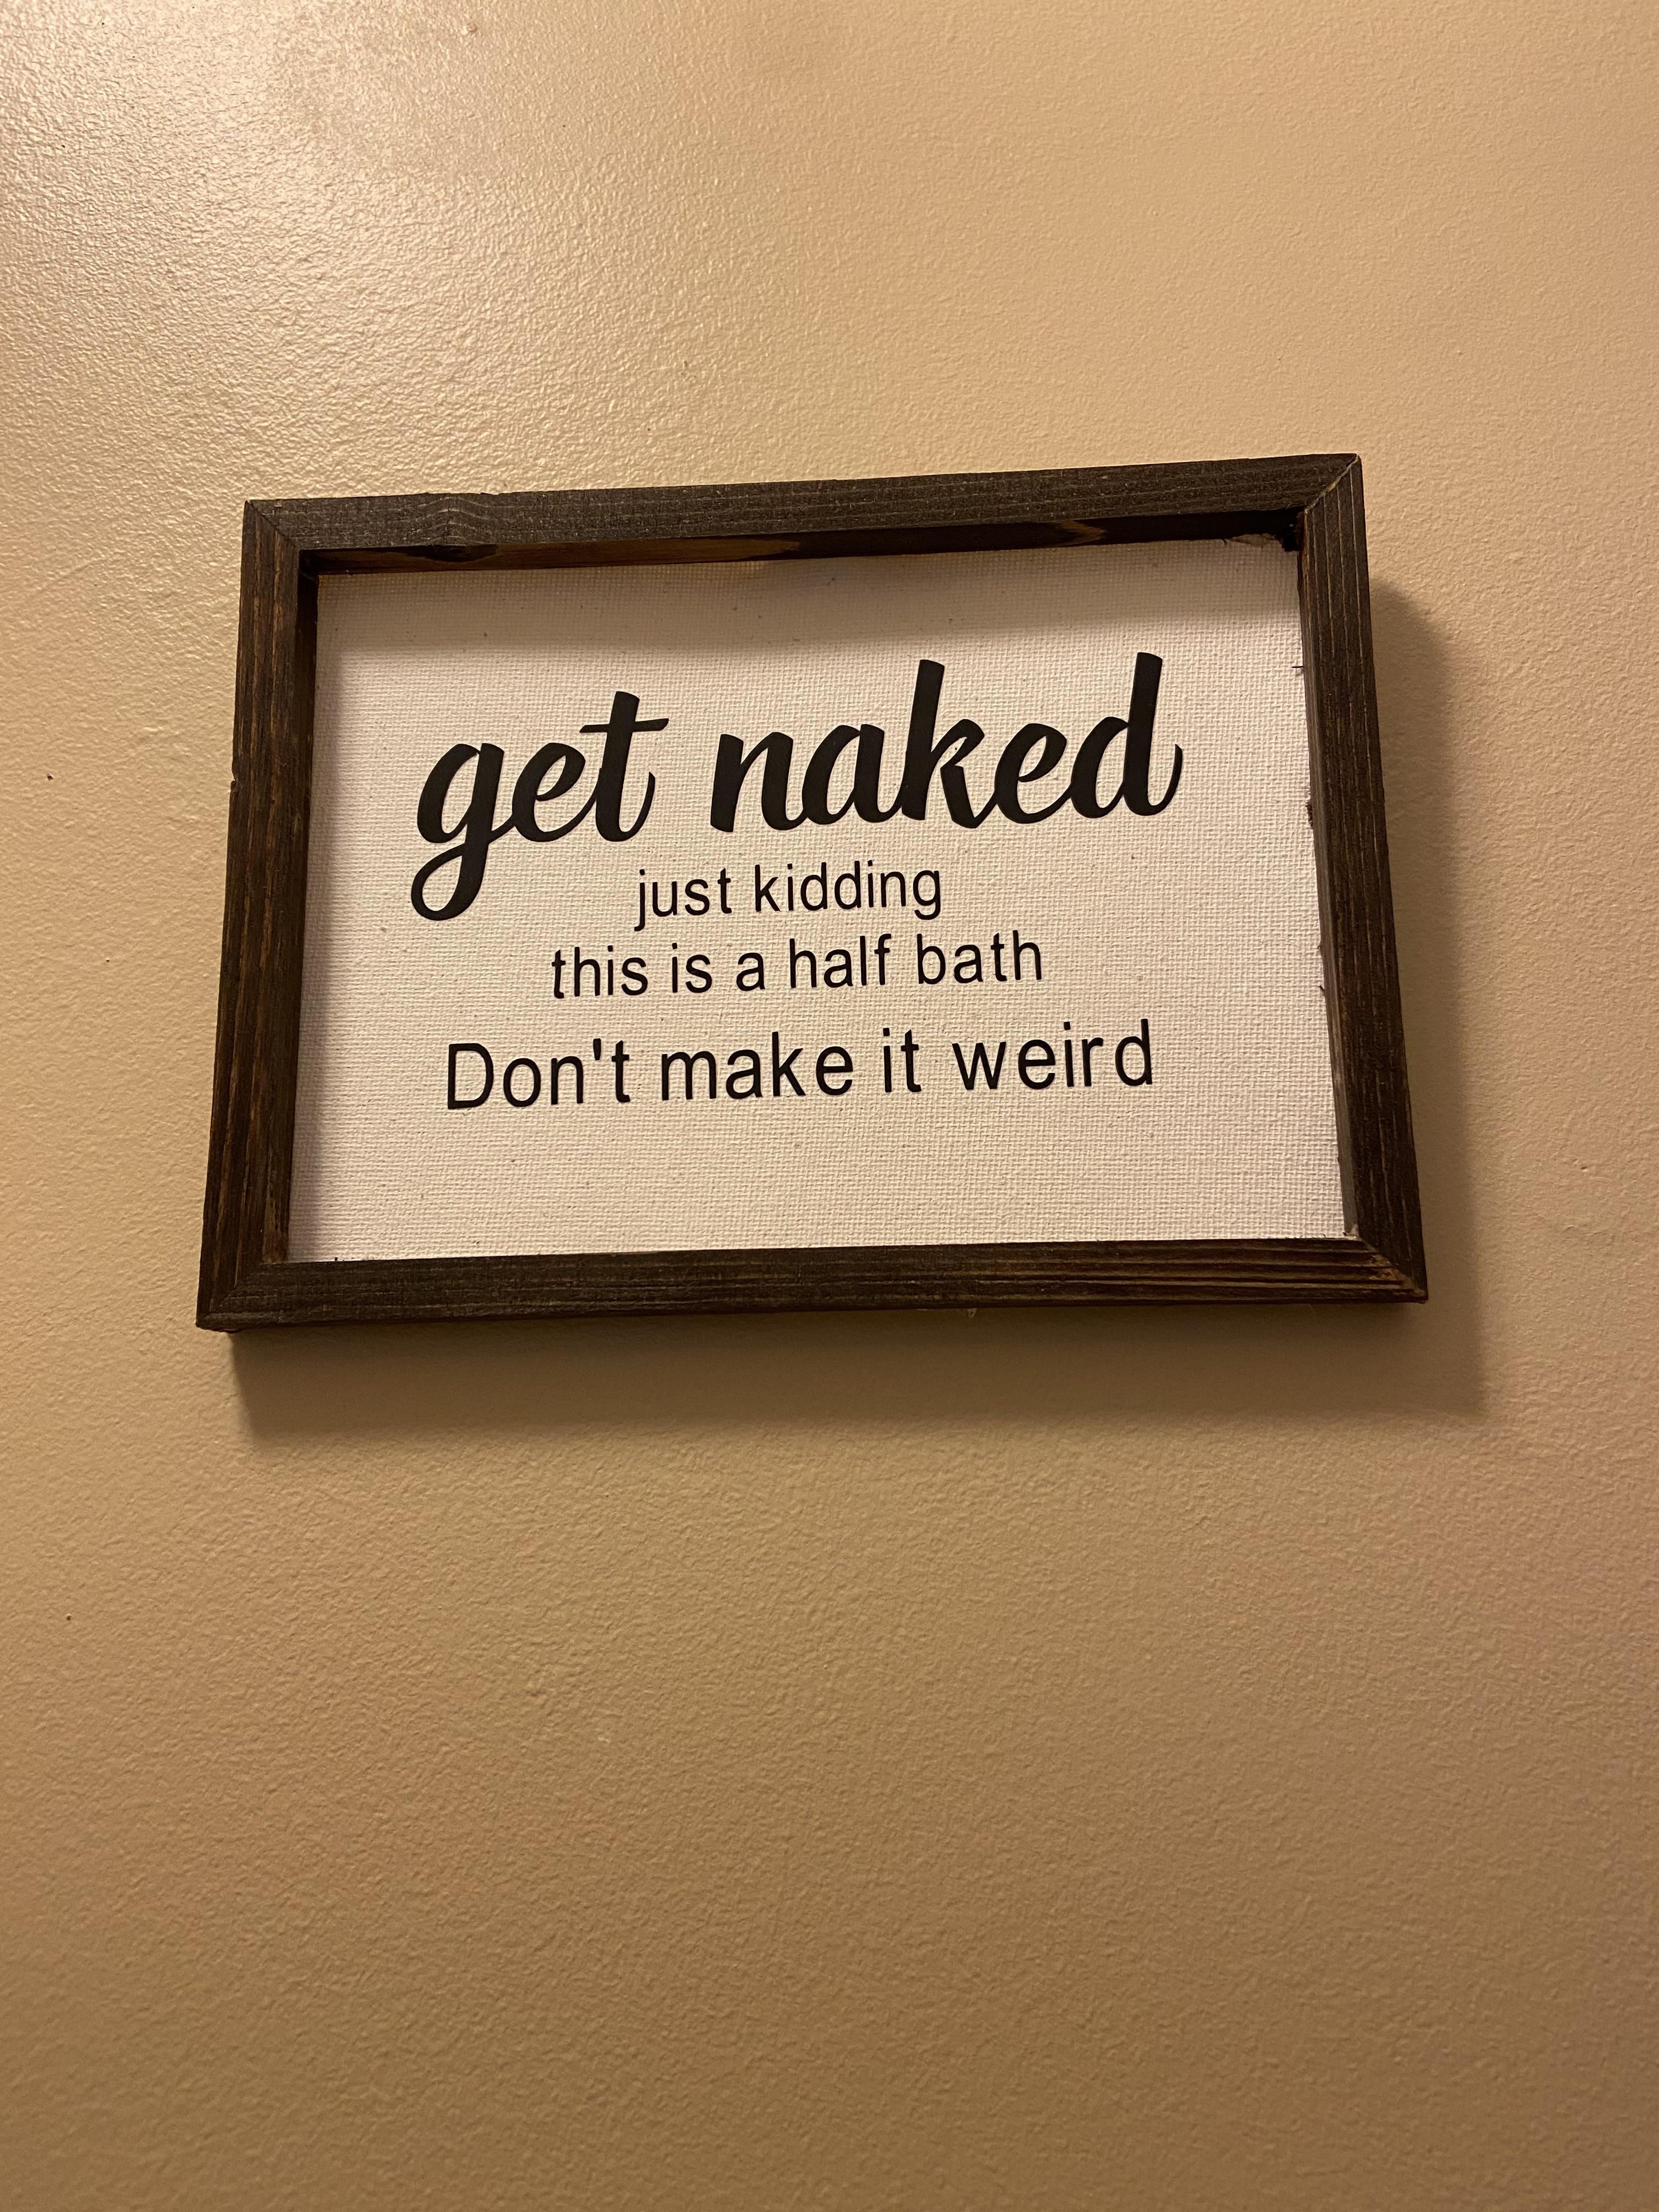 Wife decided to decorate the half bath.